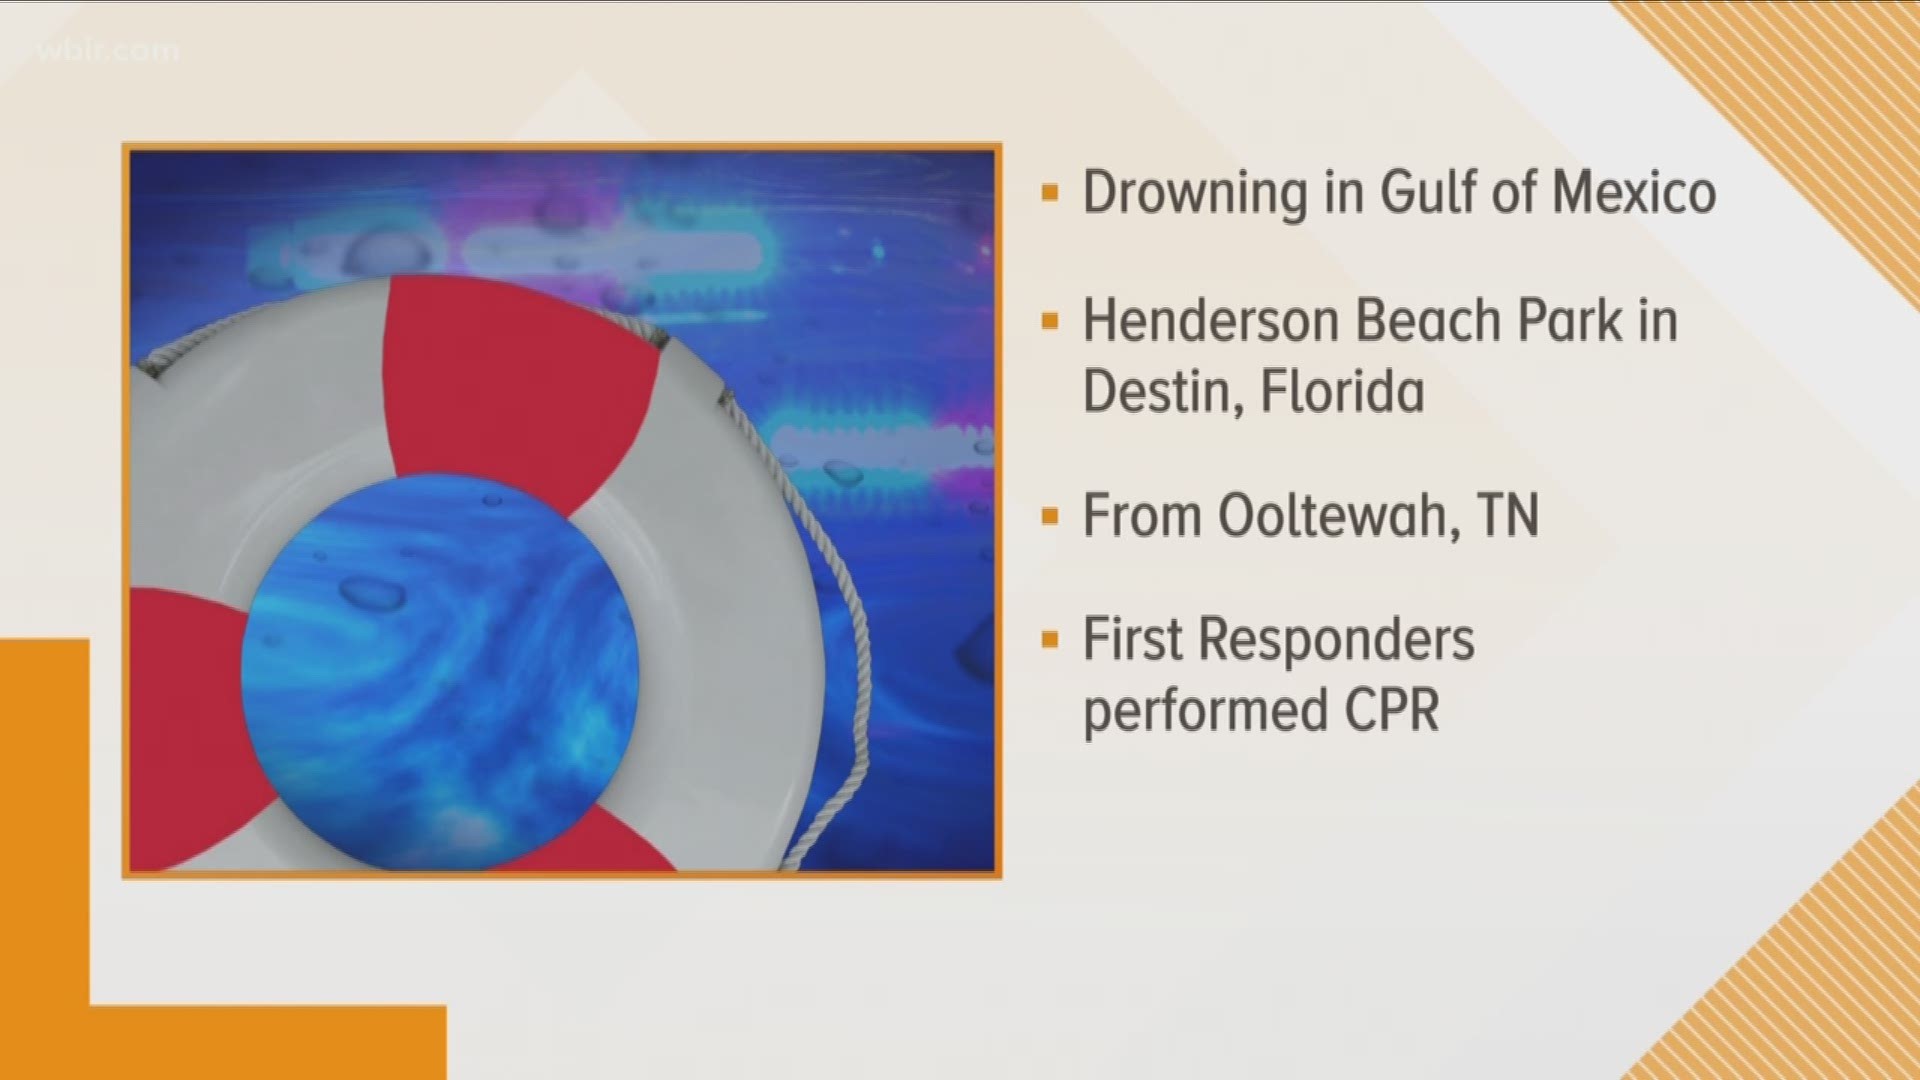 An East Tennessee man is now dead after drowning in the Gulf of Mexico. It happened at Henderson Beach park in Destin, Florida. The victim's daughter says his legs were swept out from under him in the rough surf.